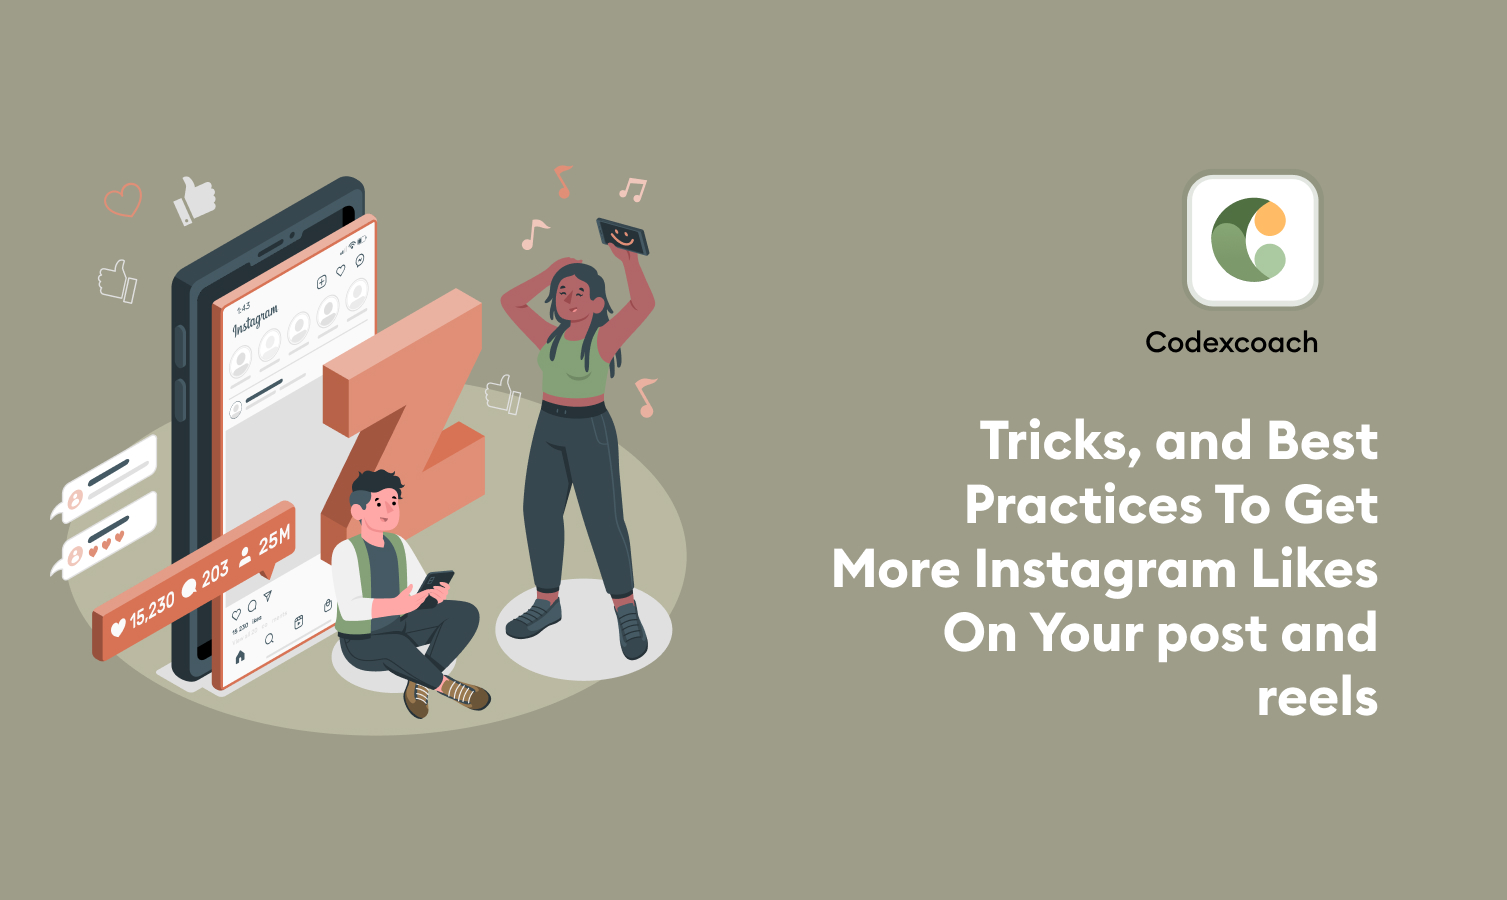 Tricks, and Best Practices To Get More Instagram Likes On Your post and reels